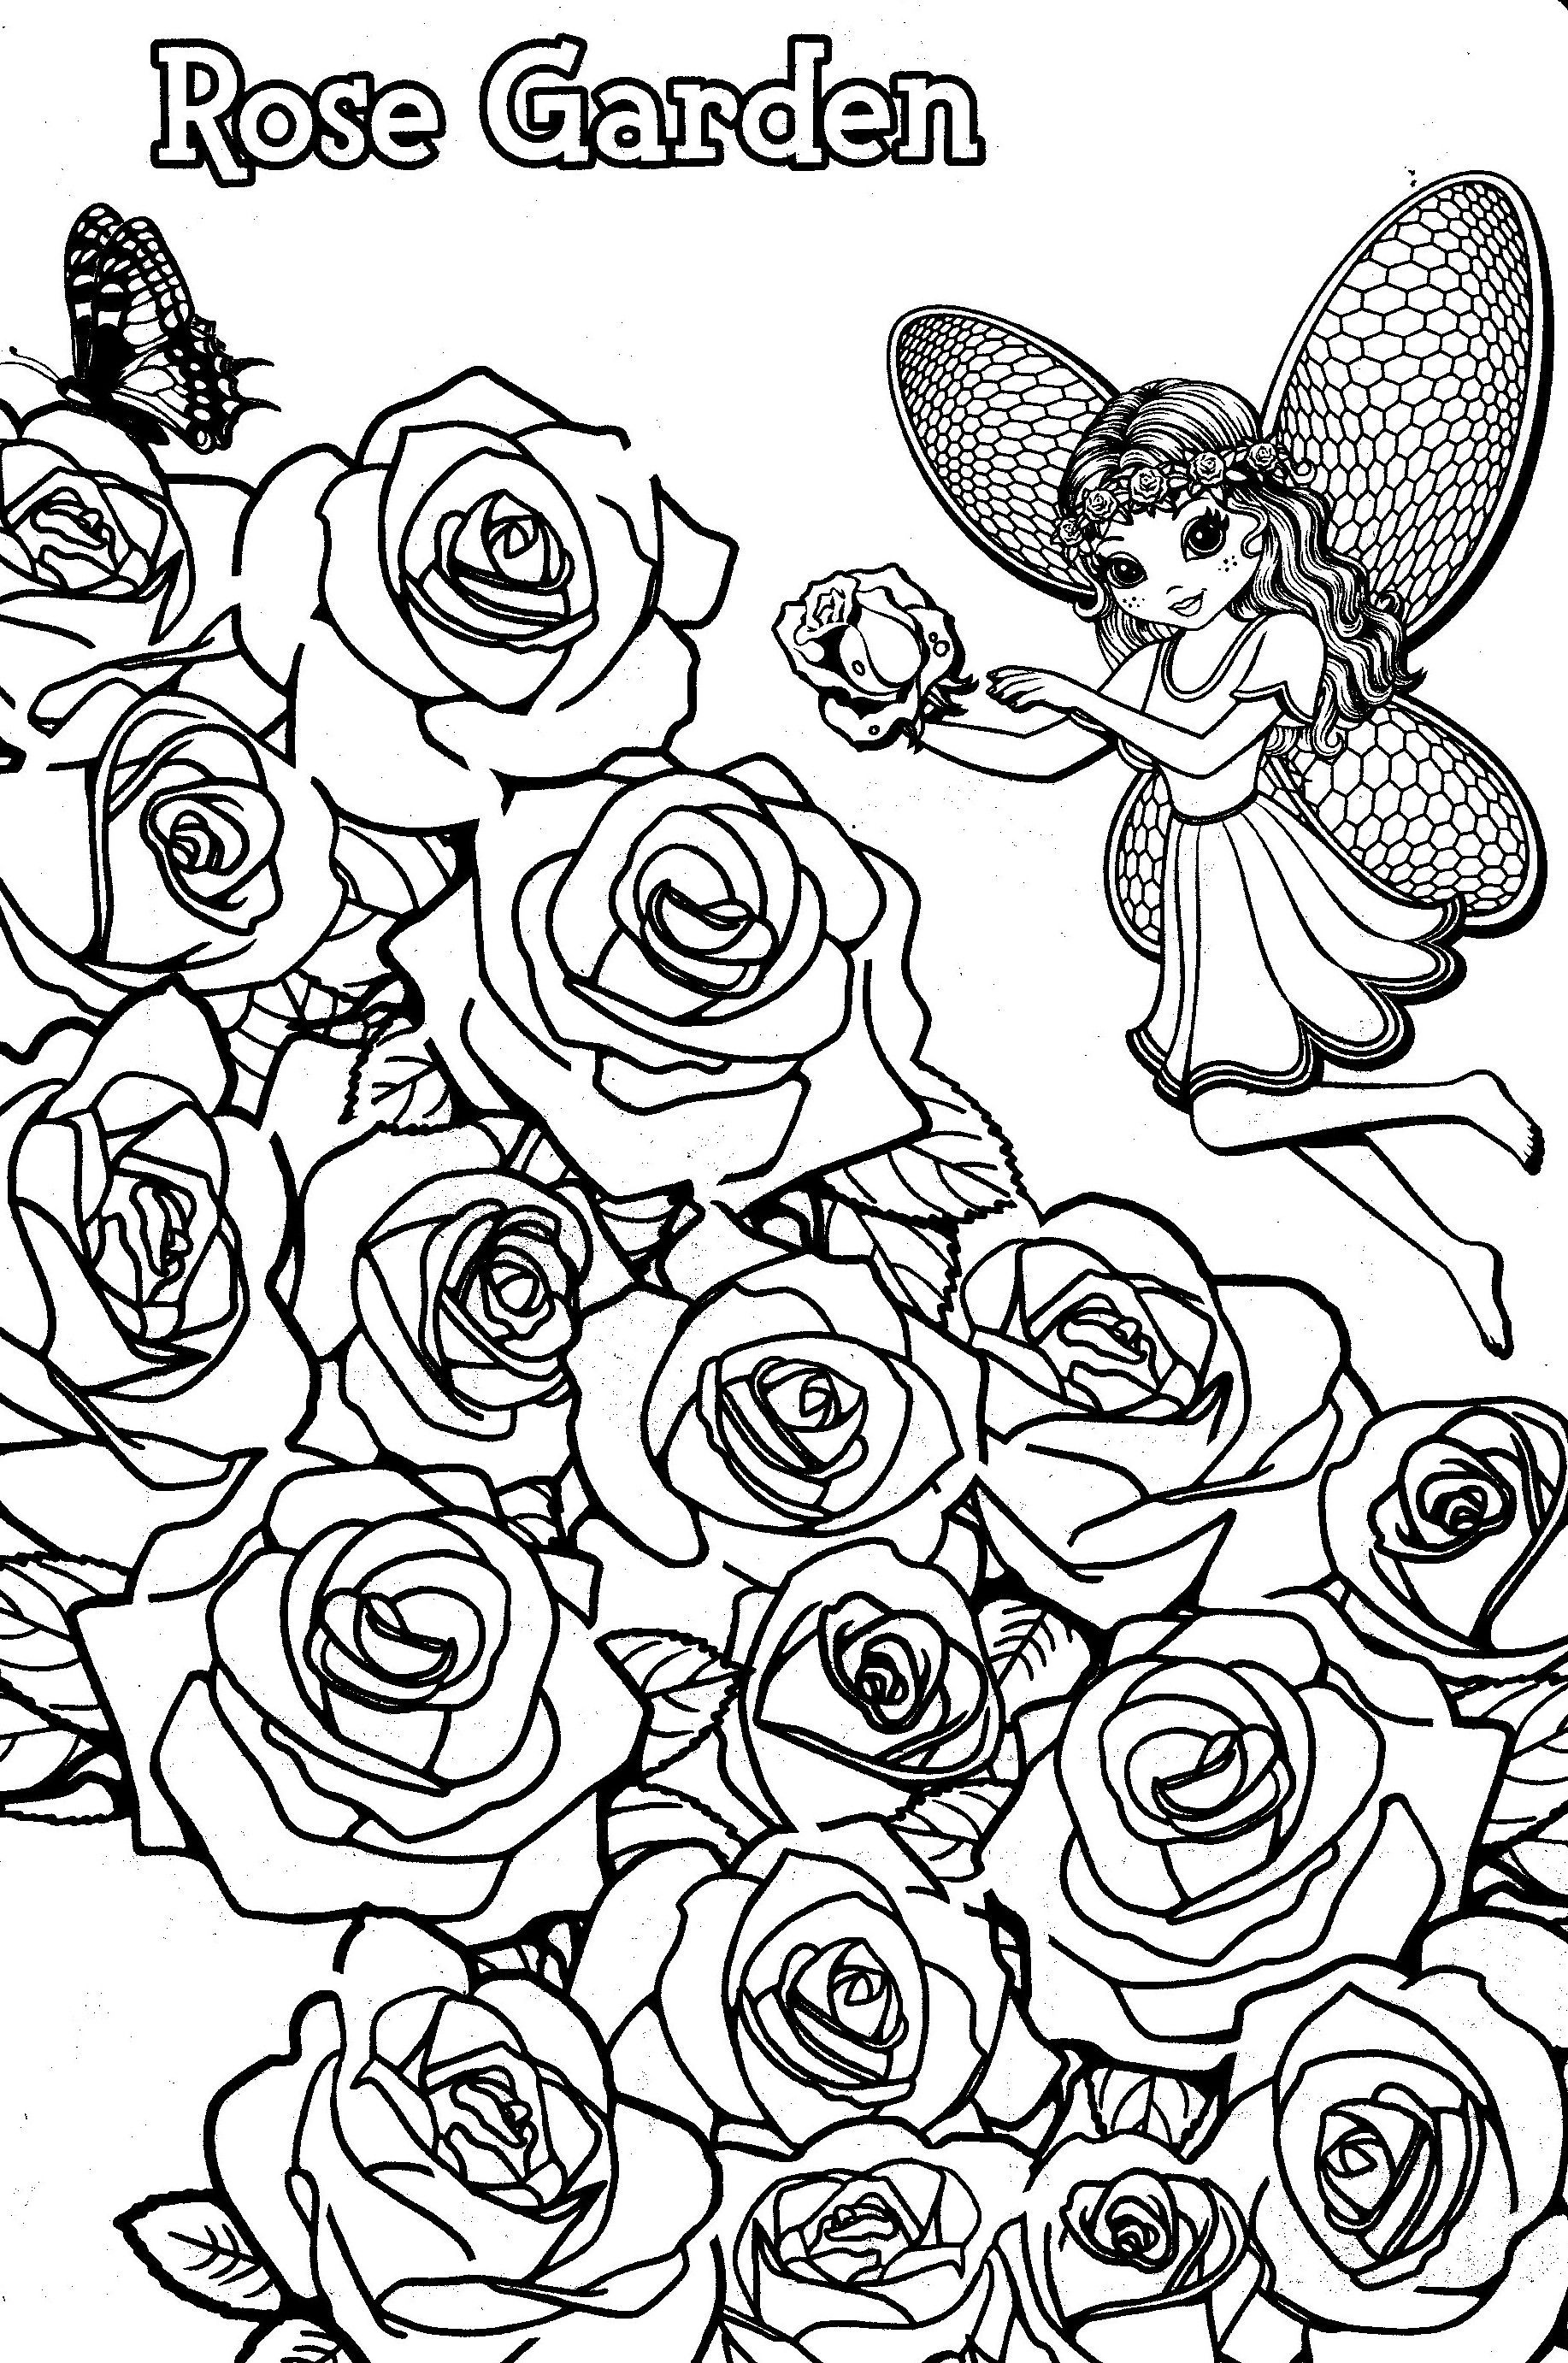 Rose Garden Coloring Pages at GetColorings.com | Free ...